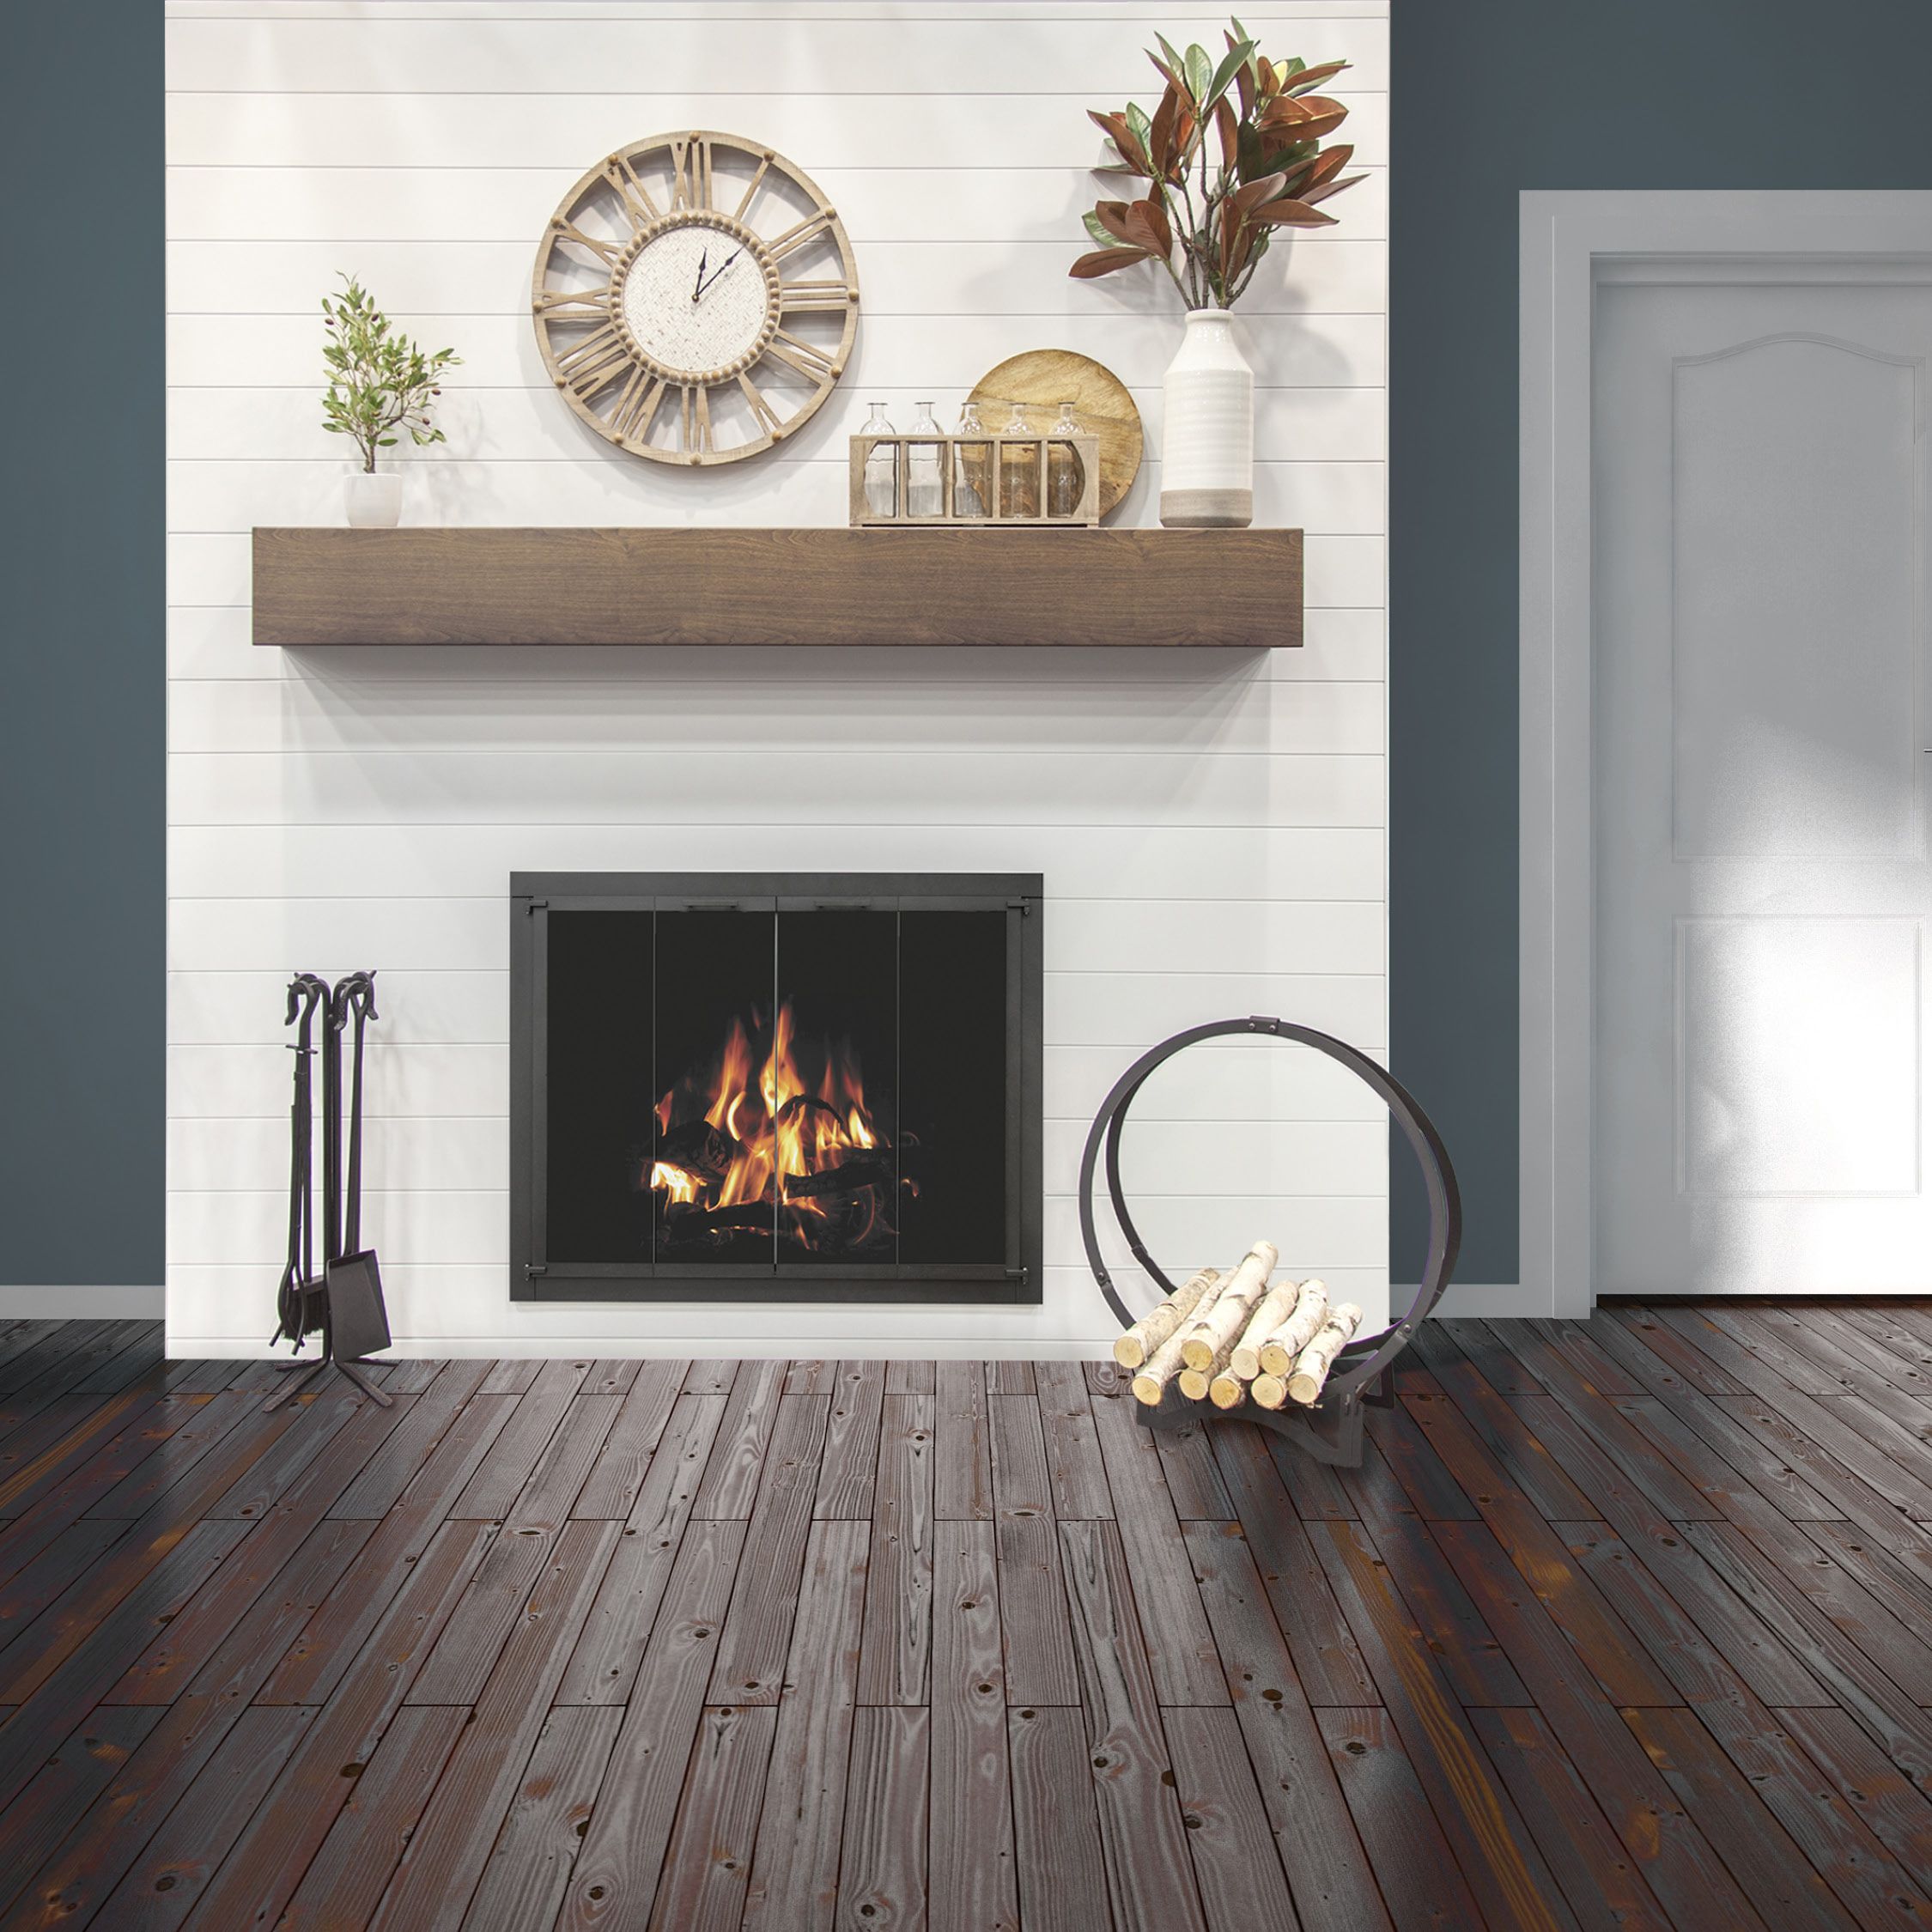 Shiplap Fireplace Ideas Beautiful Create A Fresh Farmhouse Look with Our New White Shiplap